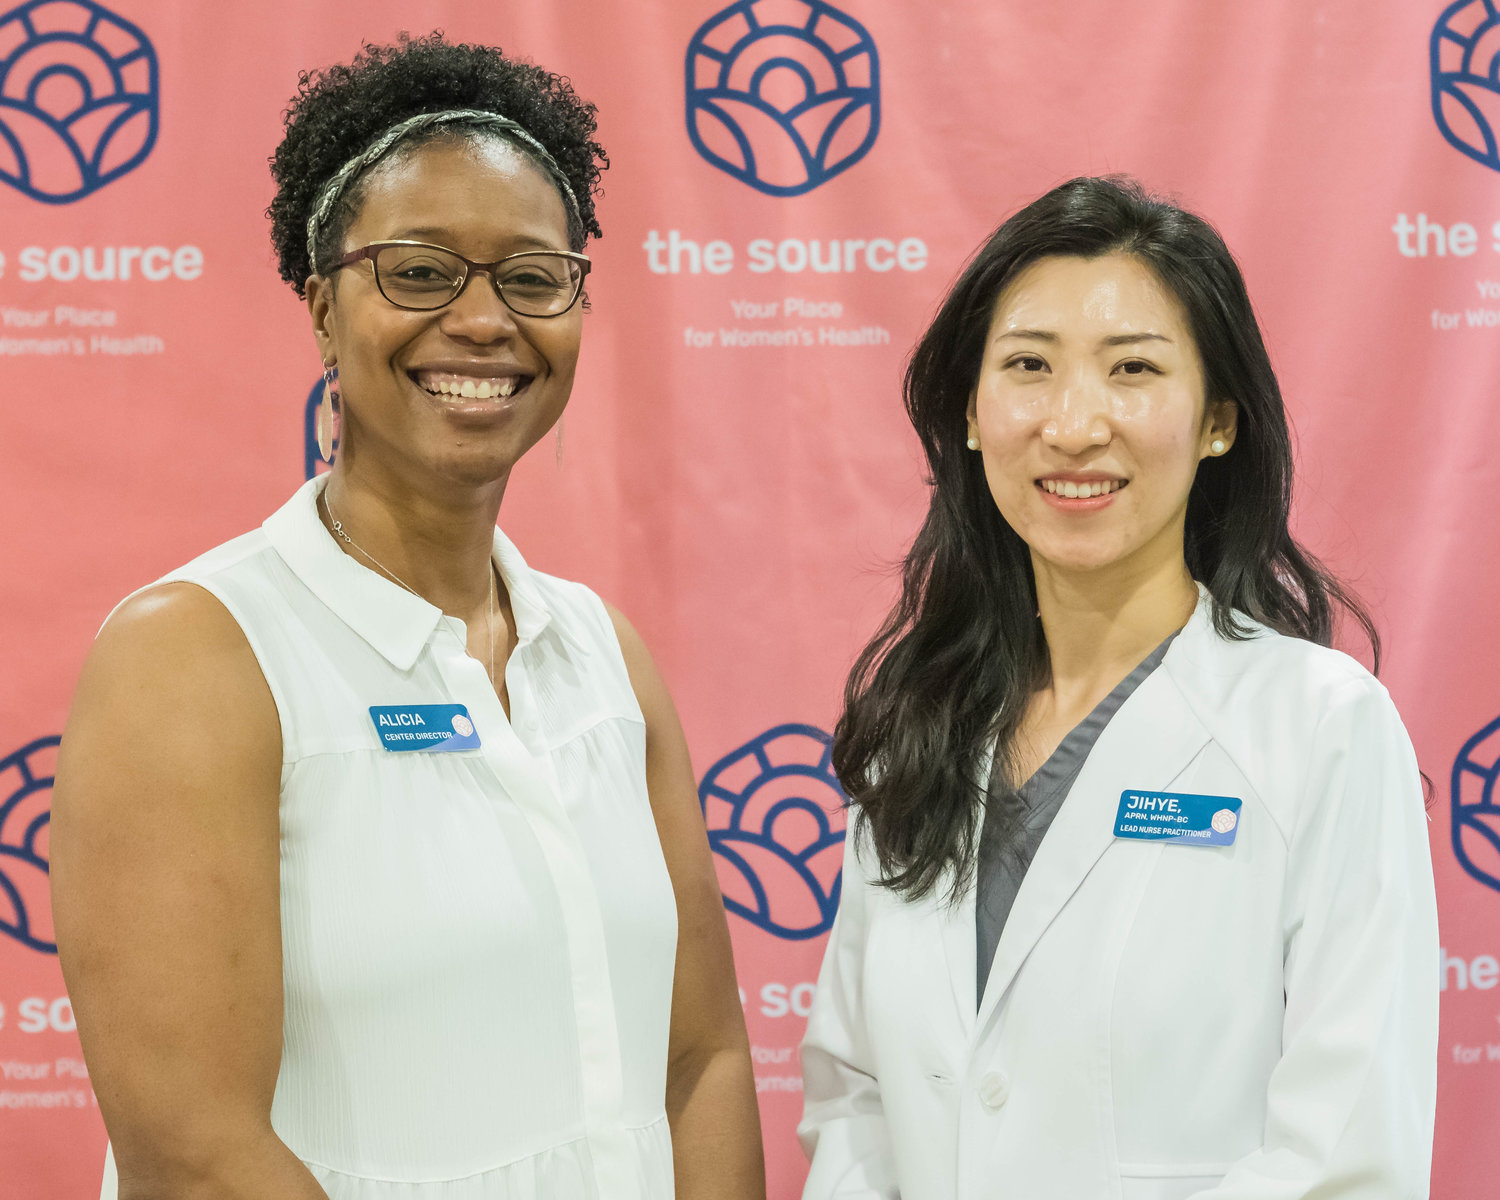 The Source’s Spring Branch Clinic Director Alicia Purvis (left) and Lead Nurse Practitioner Jihye Sim (right) attend an event for the nonprofit which provides well-woman services to ladies of all ages. The Source focuses on counseling women facing the difficult choice of whether or not to abort a pregnancy and works to steer them toward options that allow the women to carry their children to term and to provide a healthy living environment afterward.